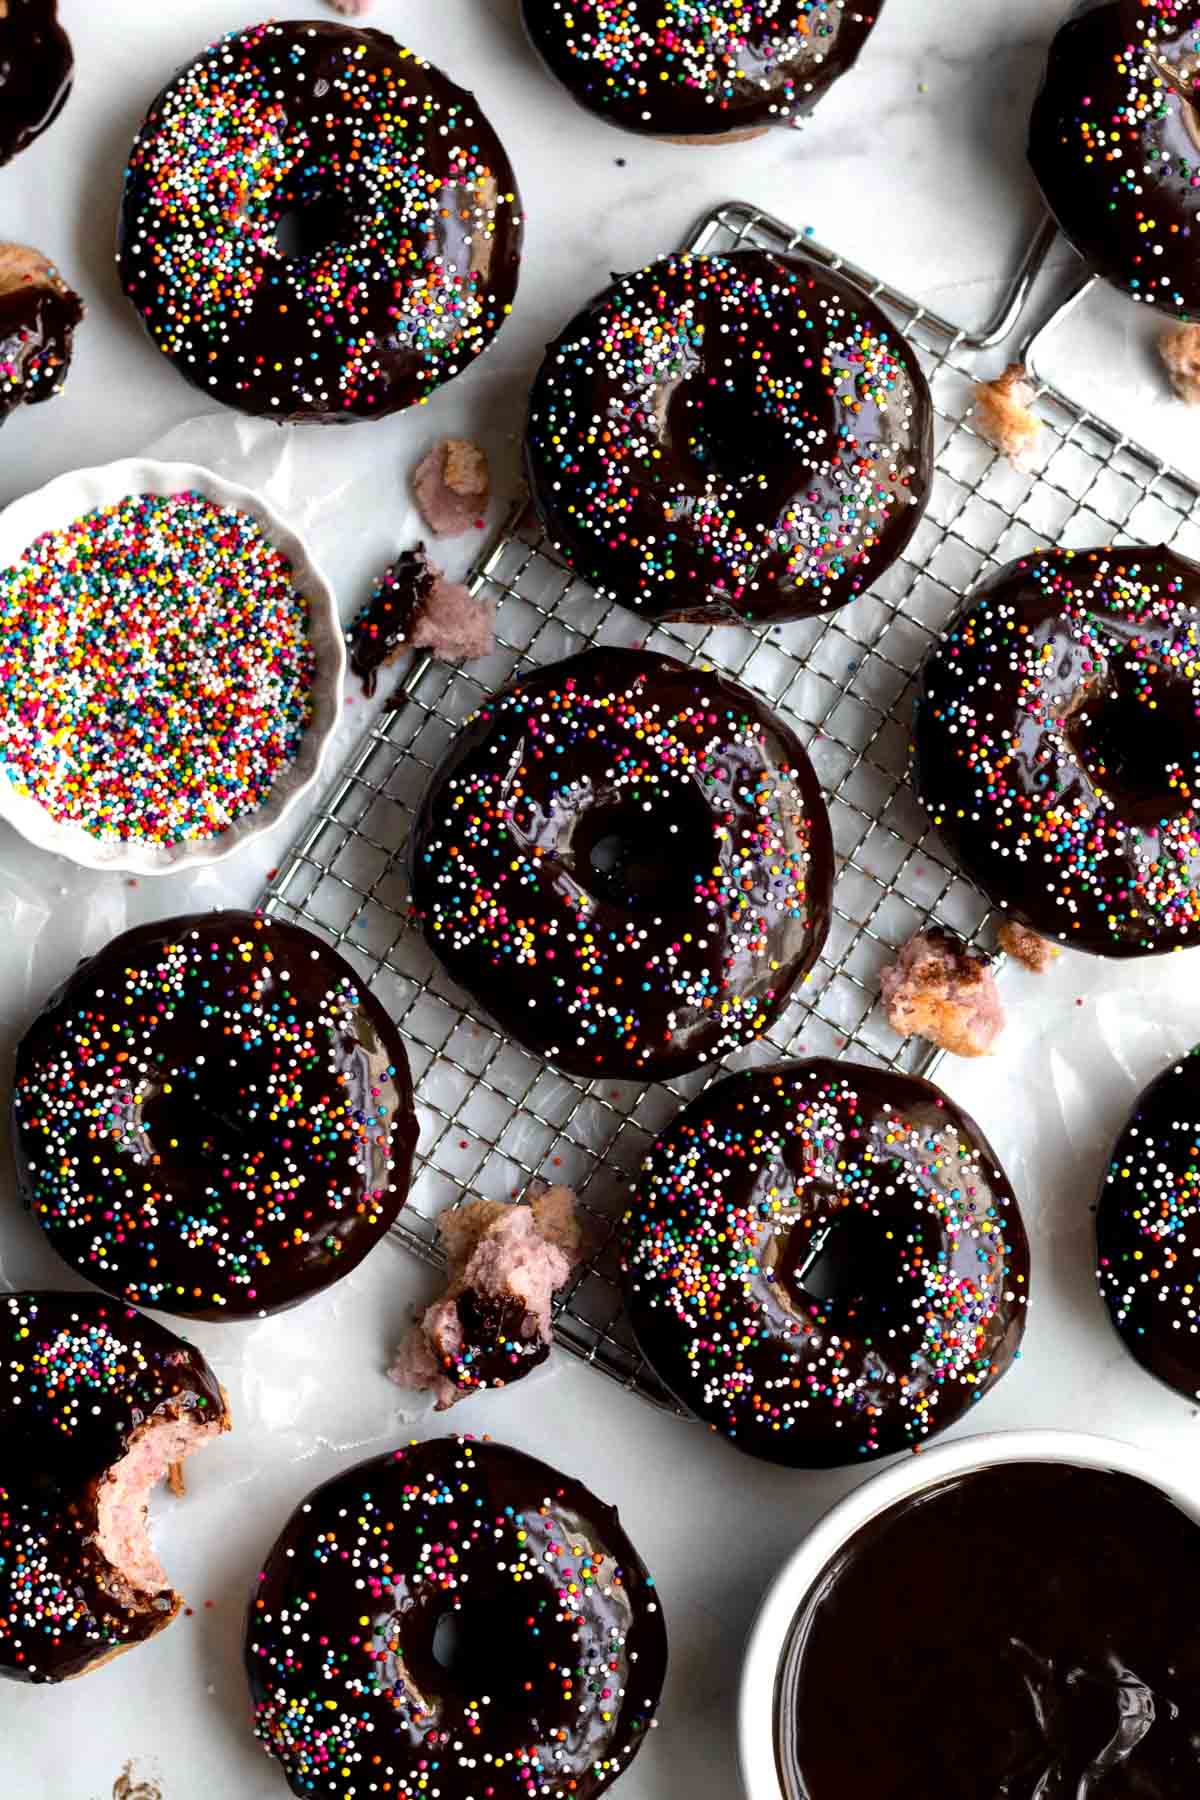 Gluten free Rainbow Donuts with chocolate frosting and rainbow colored sprinkles.